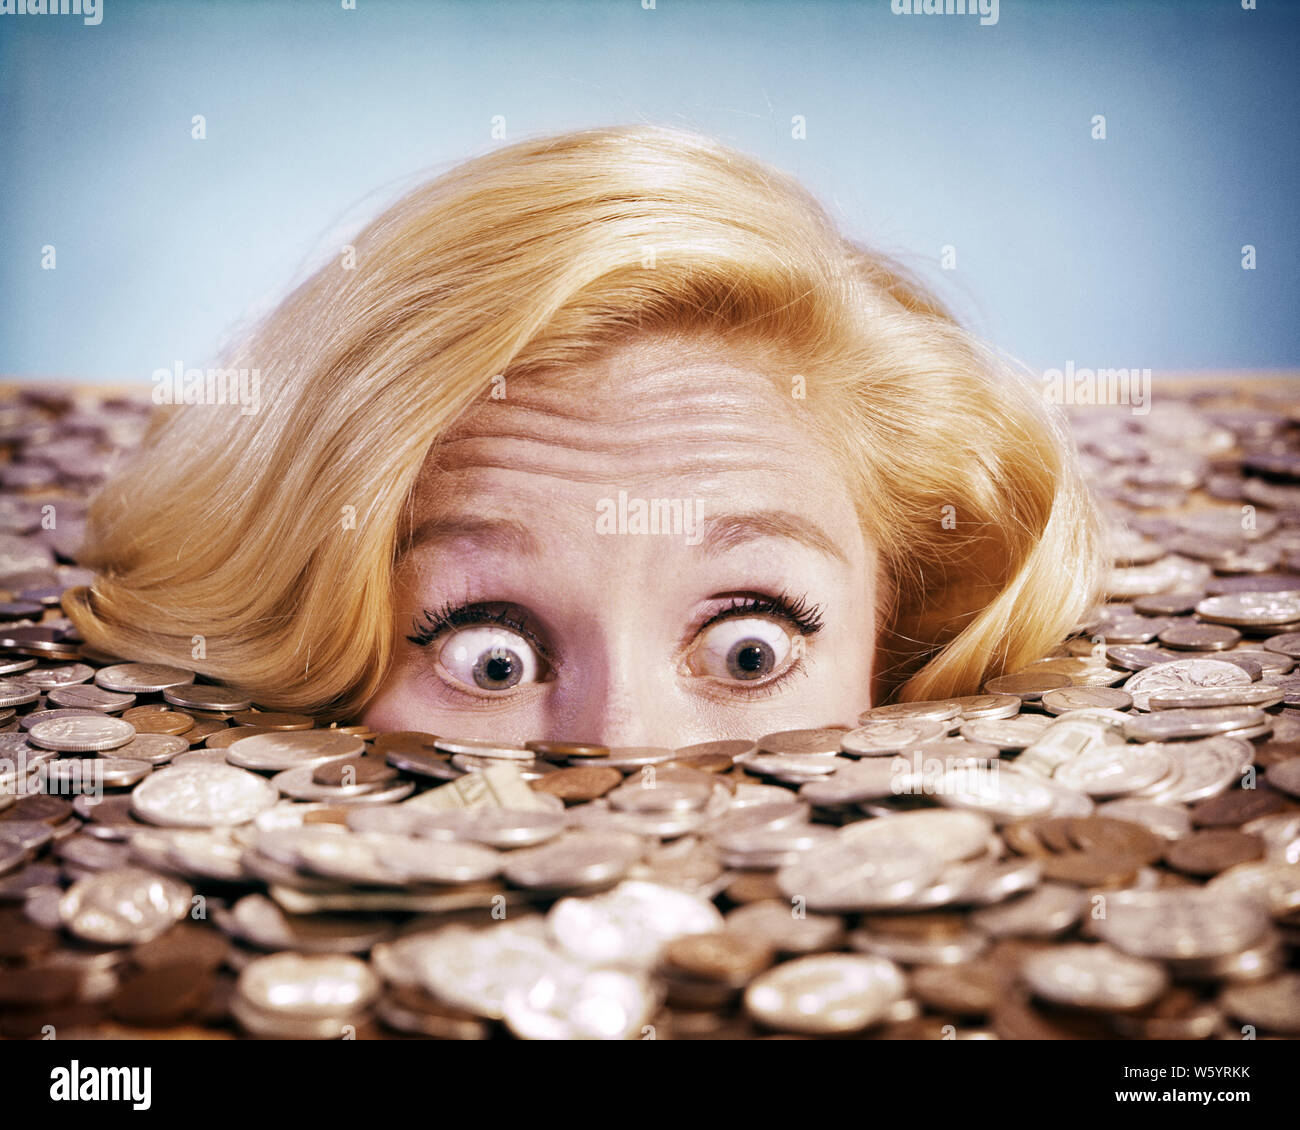 1960s PANICKED BUG-EYED BLOND YOUNG WOMAN BURIED UP TO HER NOSE IN PILE OF COINS AND CURRENCY - kg2623 HAR001 HARS FEMALES CURRENCY TREASURE STUDIO SHOT PORTRAITS GROWNUP COPY SPACE PERSONS GROWN-UP DROWNING BURIED EYE CONTACT BIZARRE SUCCESS LUCK BUG-EYED PEERING WEIRD HEAD AND SHOULDERS OVERWHELMED AND GROTESQUE WEALTH ZANY UNCONVENTIONAL UP INUNDATED PEEPING CONCEPTUAL INUNDATION WACKY WIDE EYED IDIOSYNCRATIC INUNDATE PANICKED AMUSING ECCENTRIC OVERWHELMING PEOPLE ADULTS REWARD STARTLED YOUNG ADULT WOMAN CAUCASIAN ETHNICITY ERRATIC HAR001 OLD FASHIONED OUTRAGEOUS SUDDEN Stock Photo